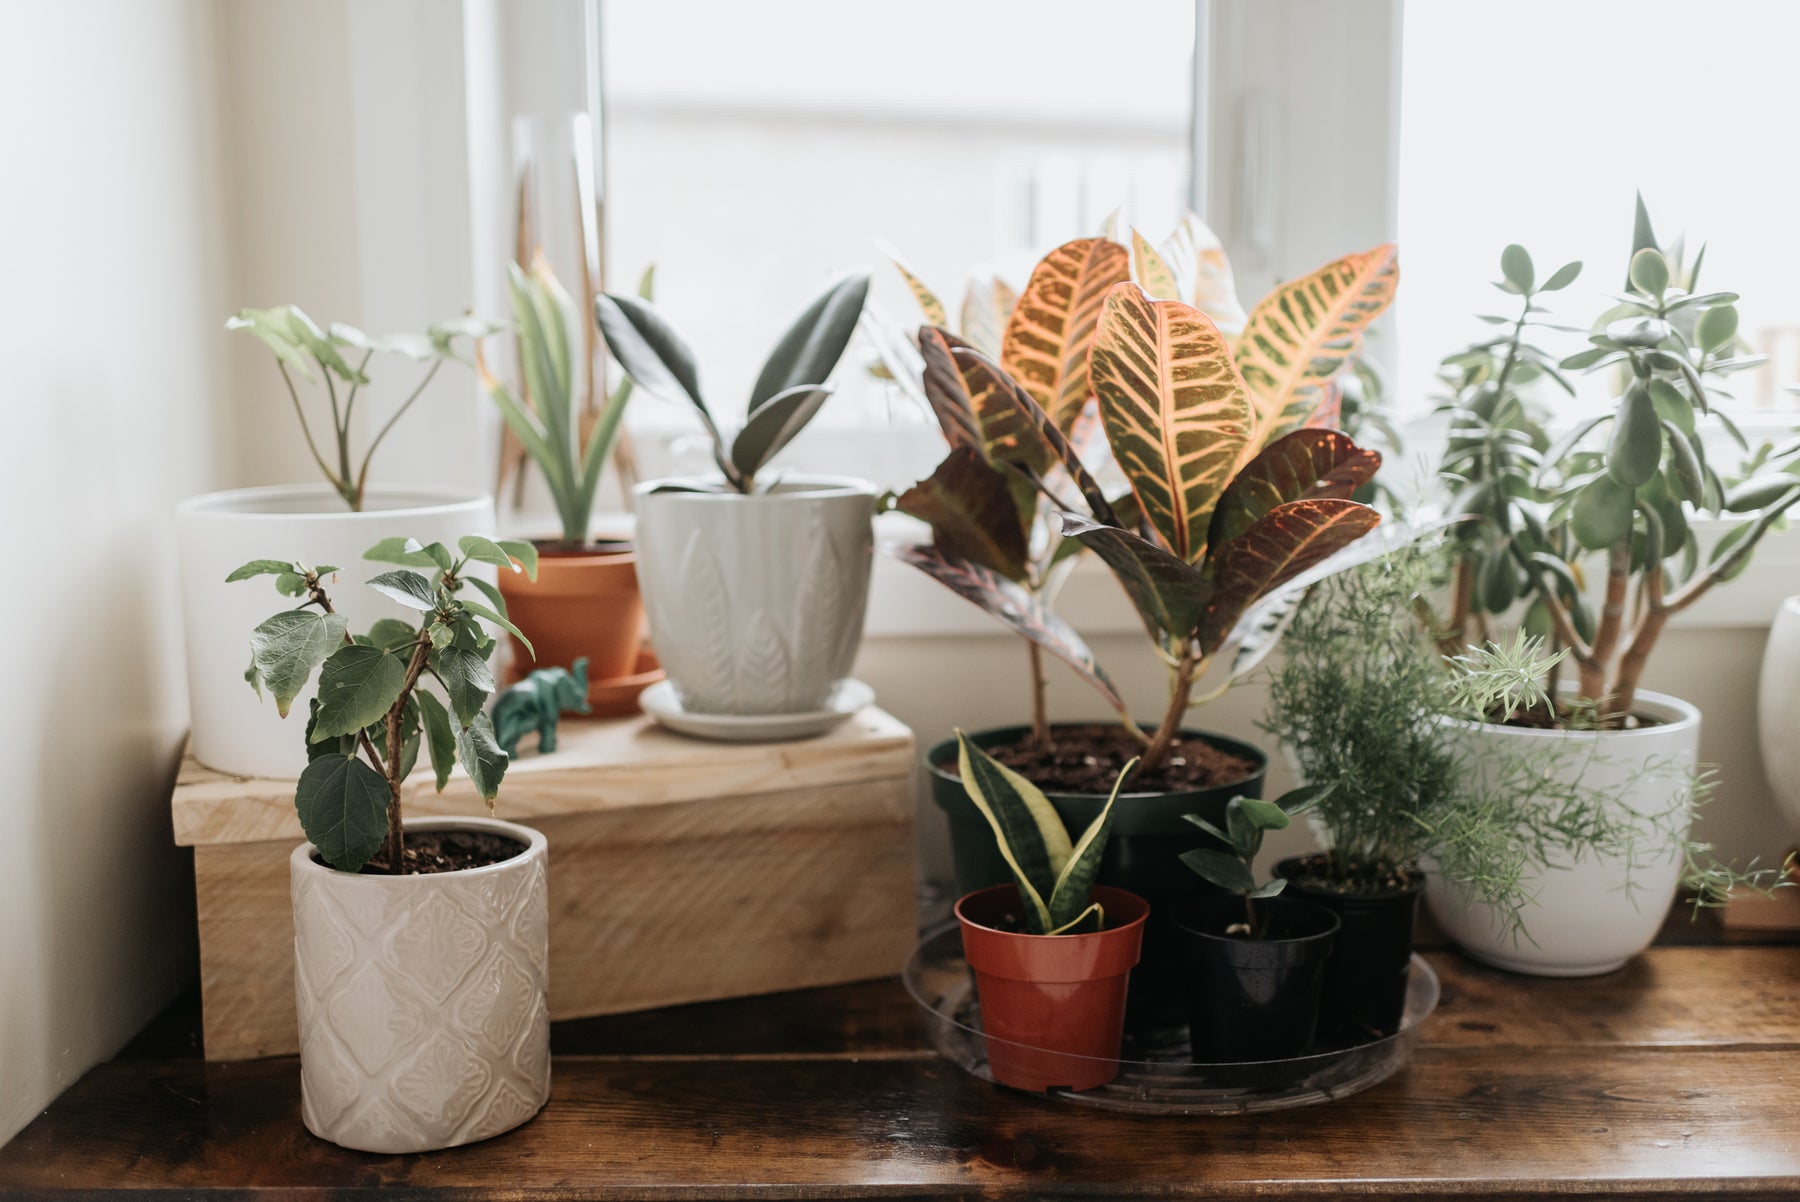 Why Indoor Plants Make You Feel Better?